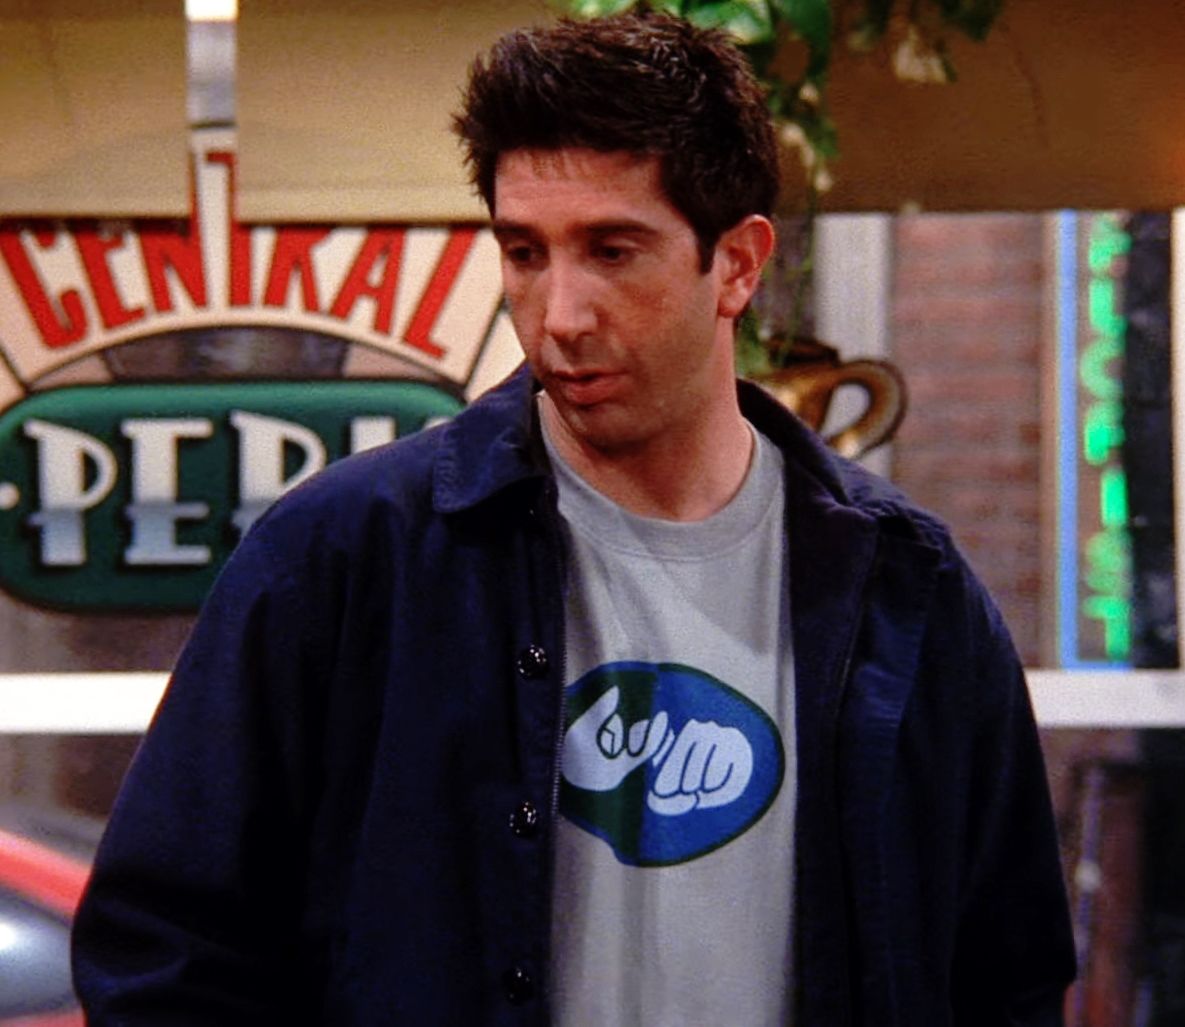 Friends\' first episode might know things you some - not